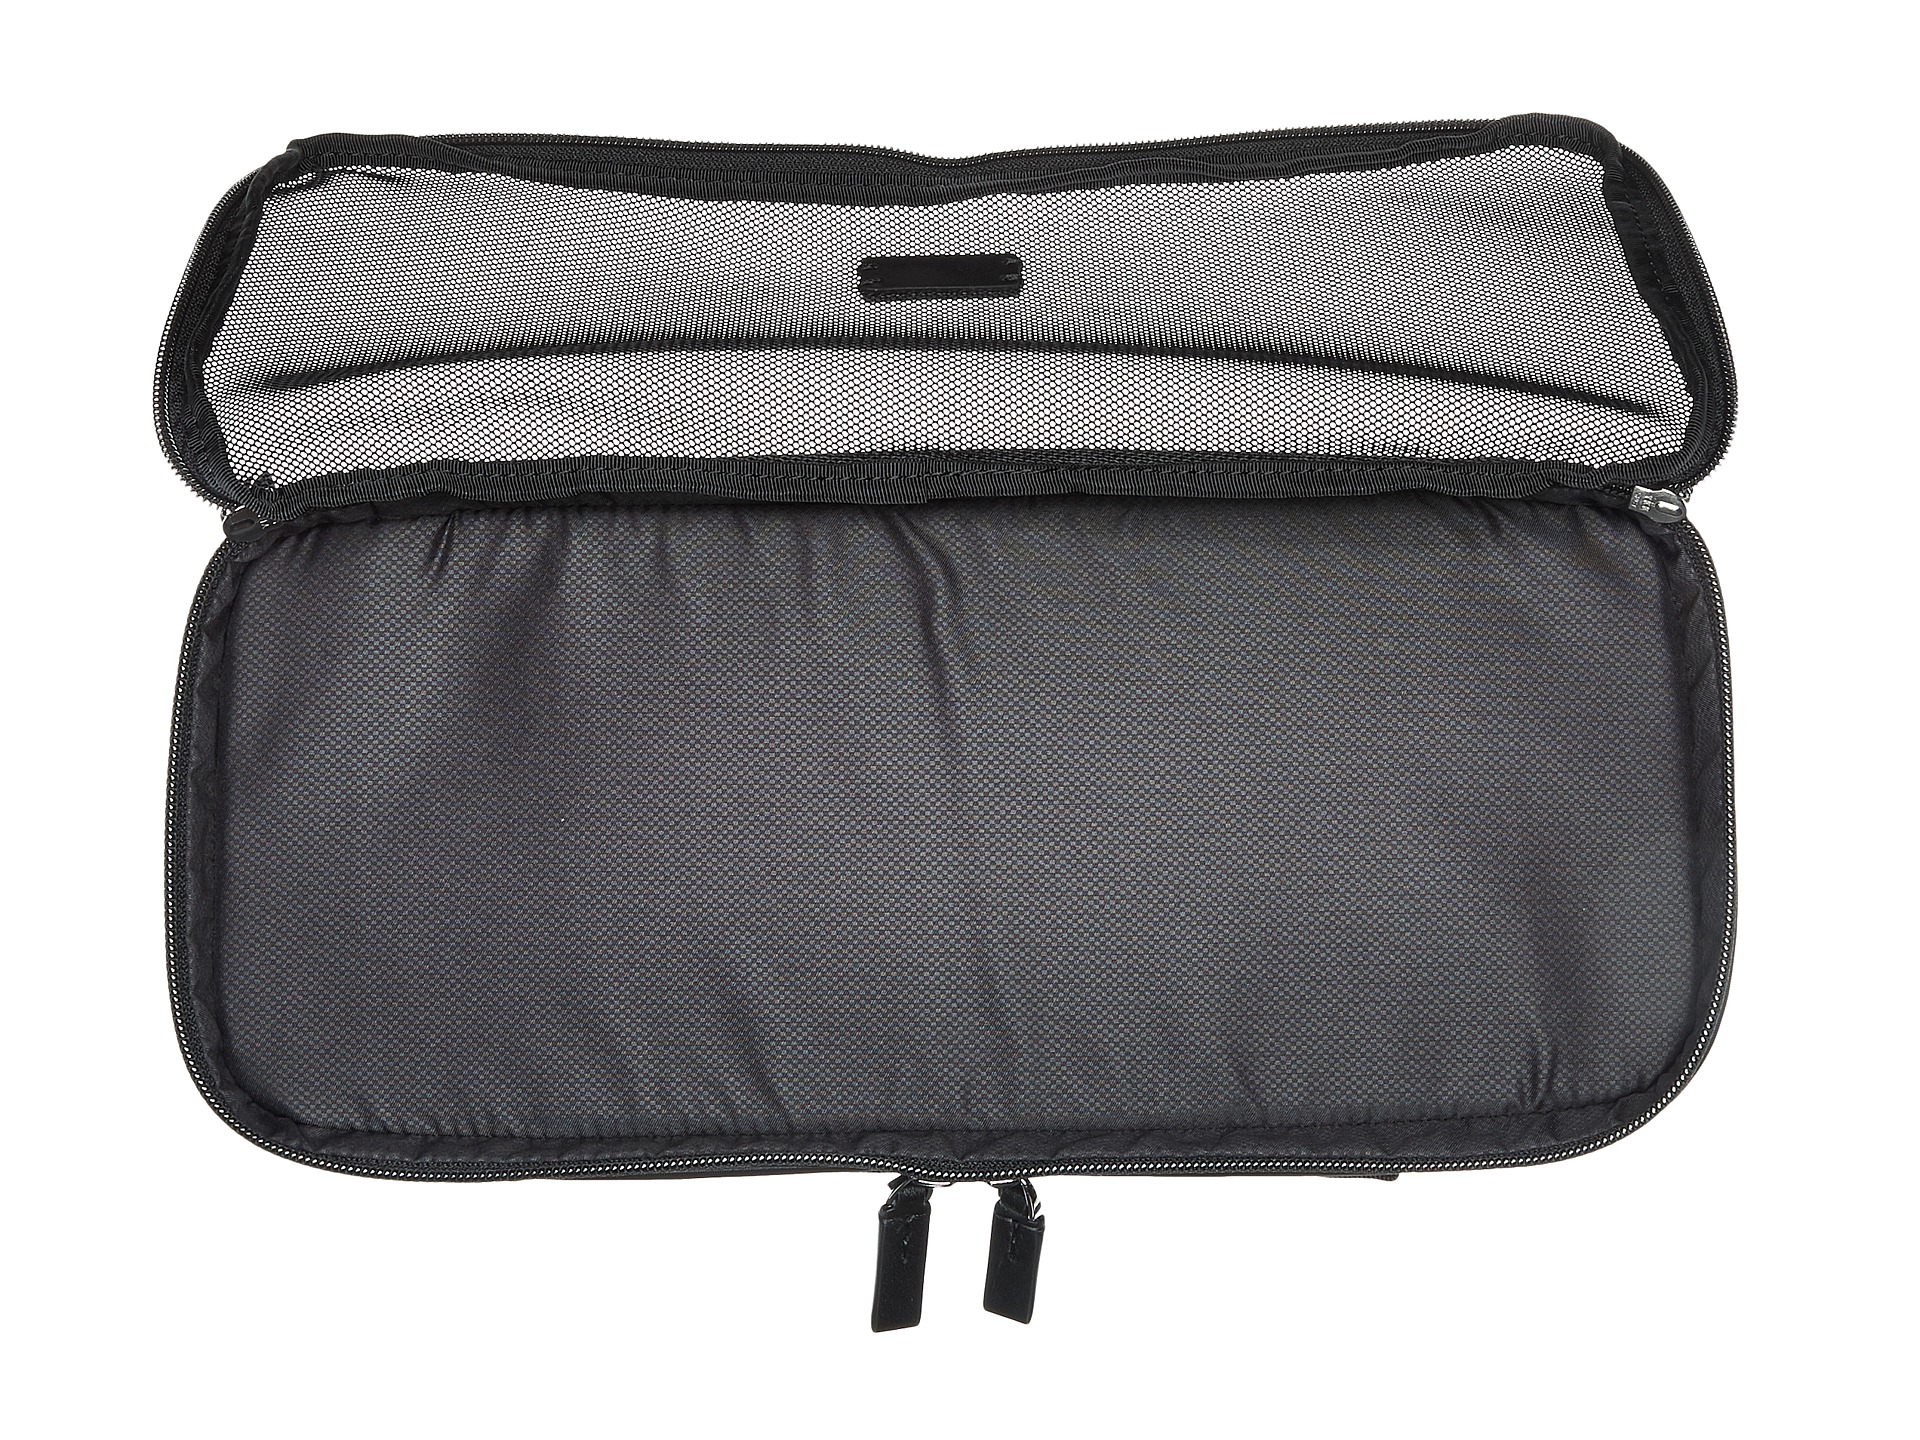 Tumi Large Dual Compartment Packing Cube at Zappos.com